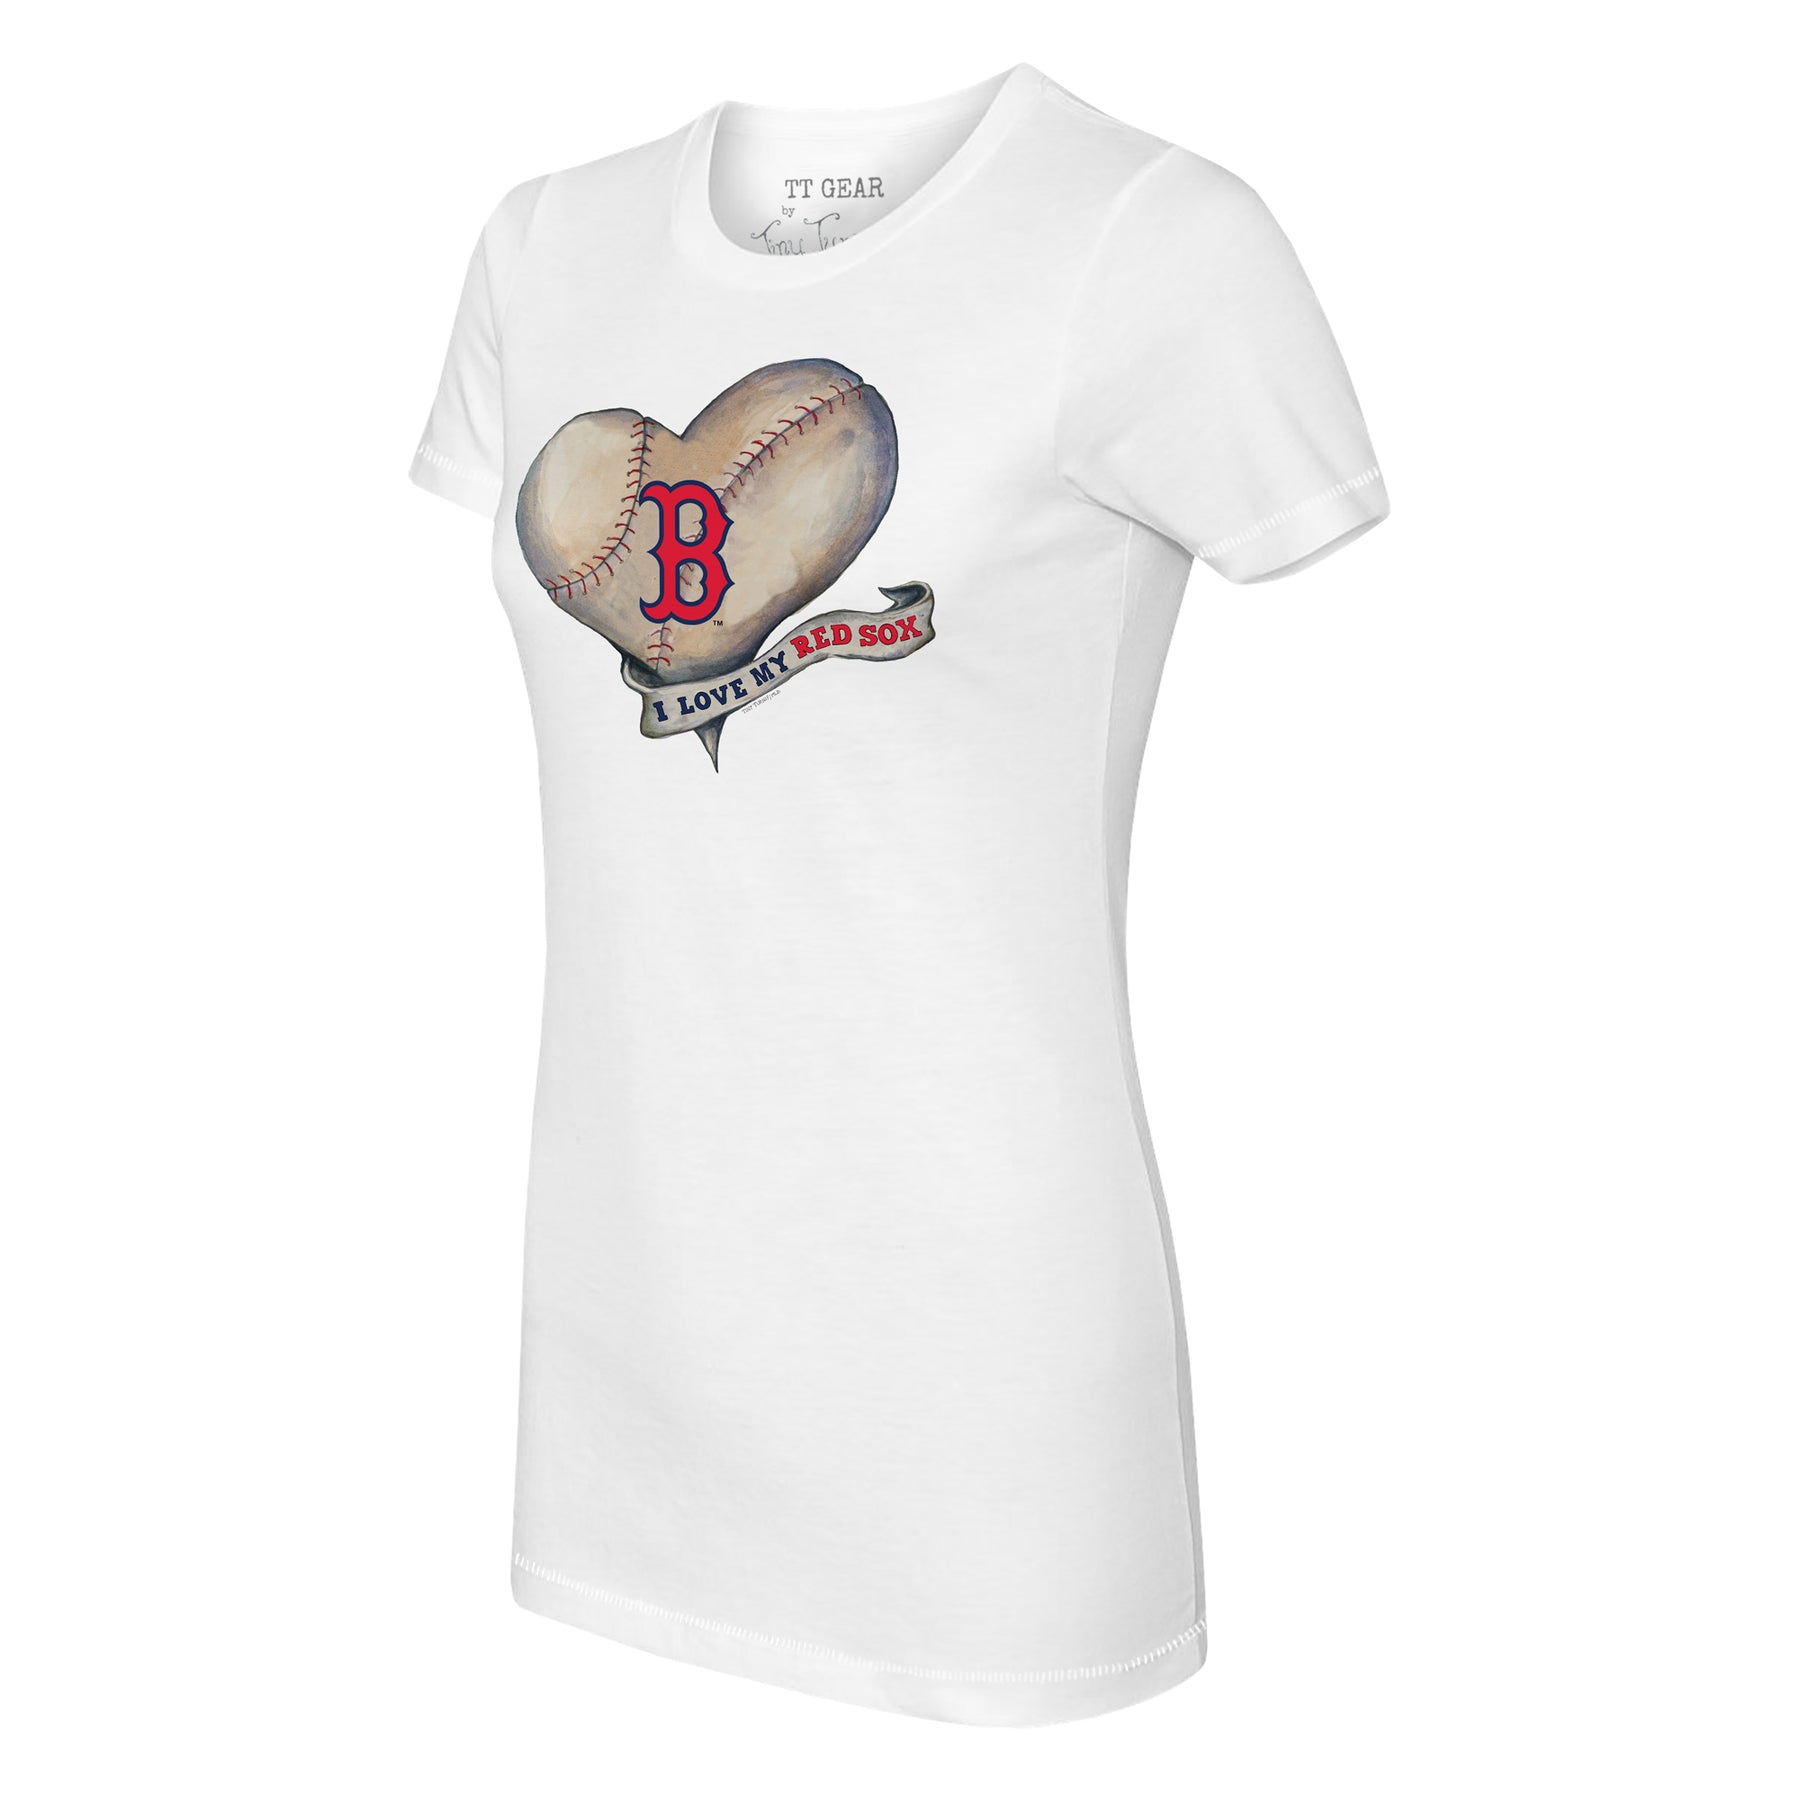 Unisex Tiny Turnip White/Red Boston Red Sox State Outline 3/4-Sleeve Raglan T-Shirt Size: Small